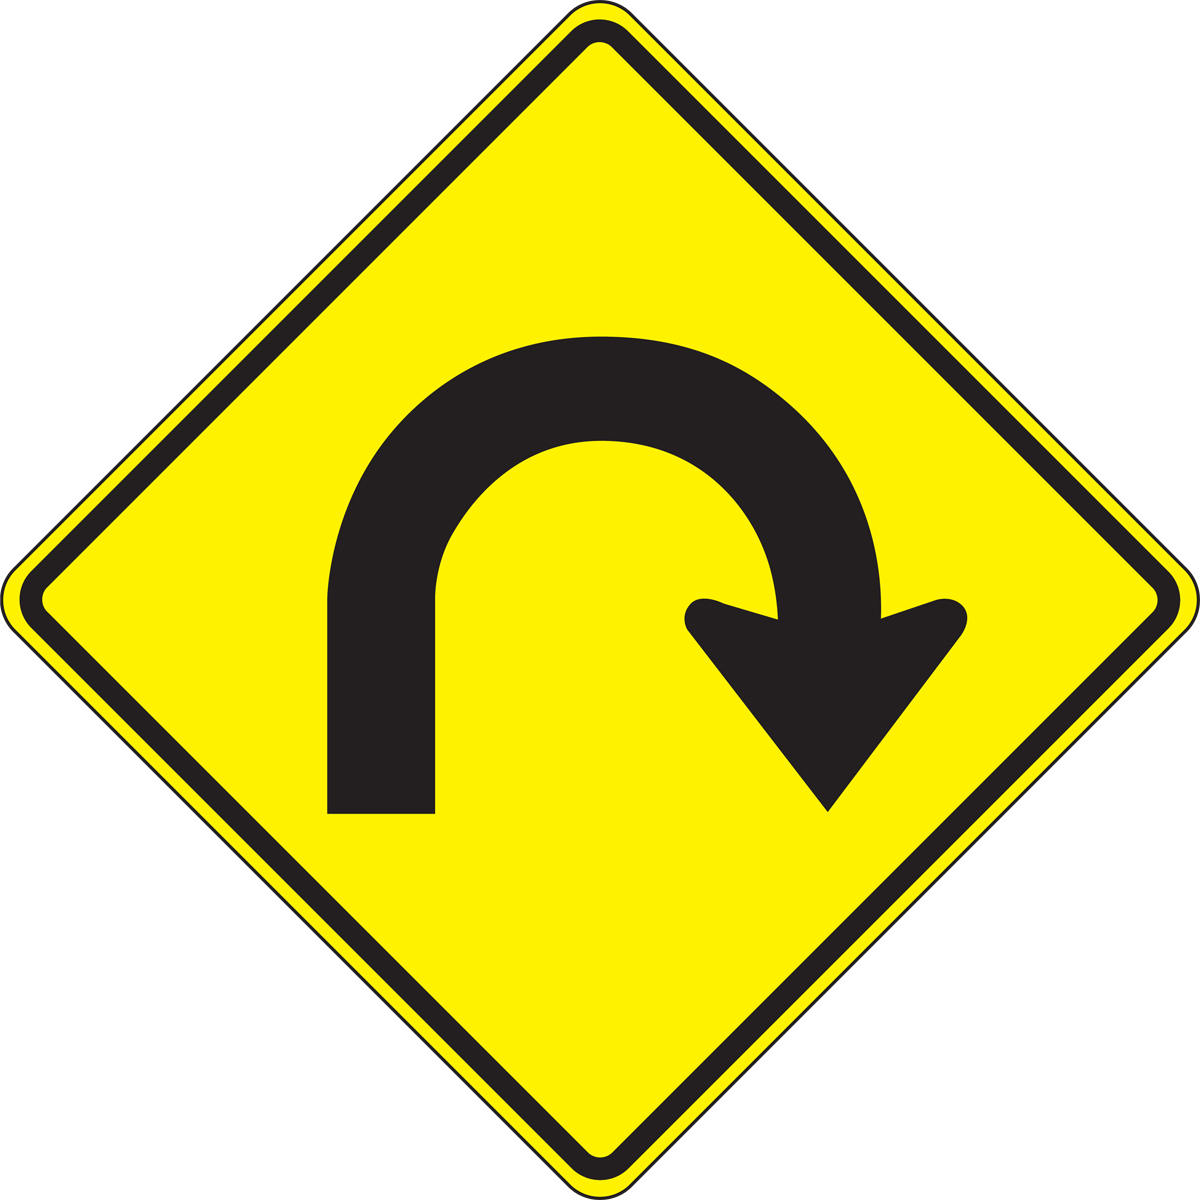 (HAIRPIN CURVE PICTORIAL)